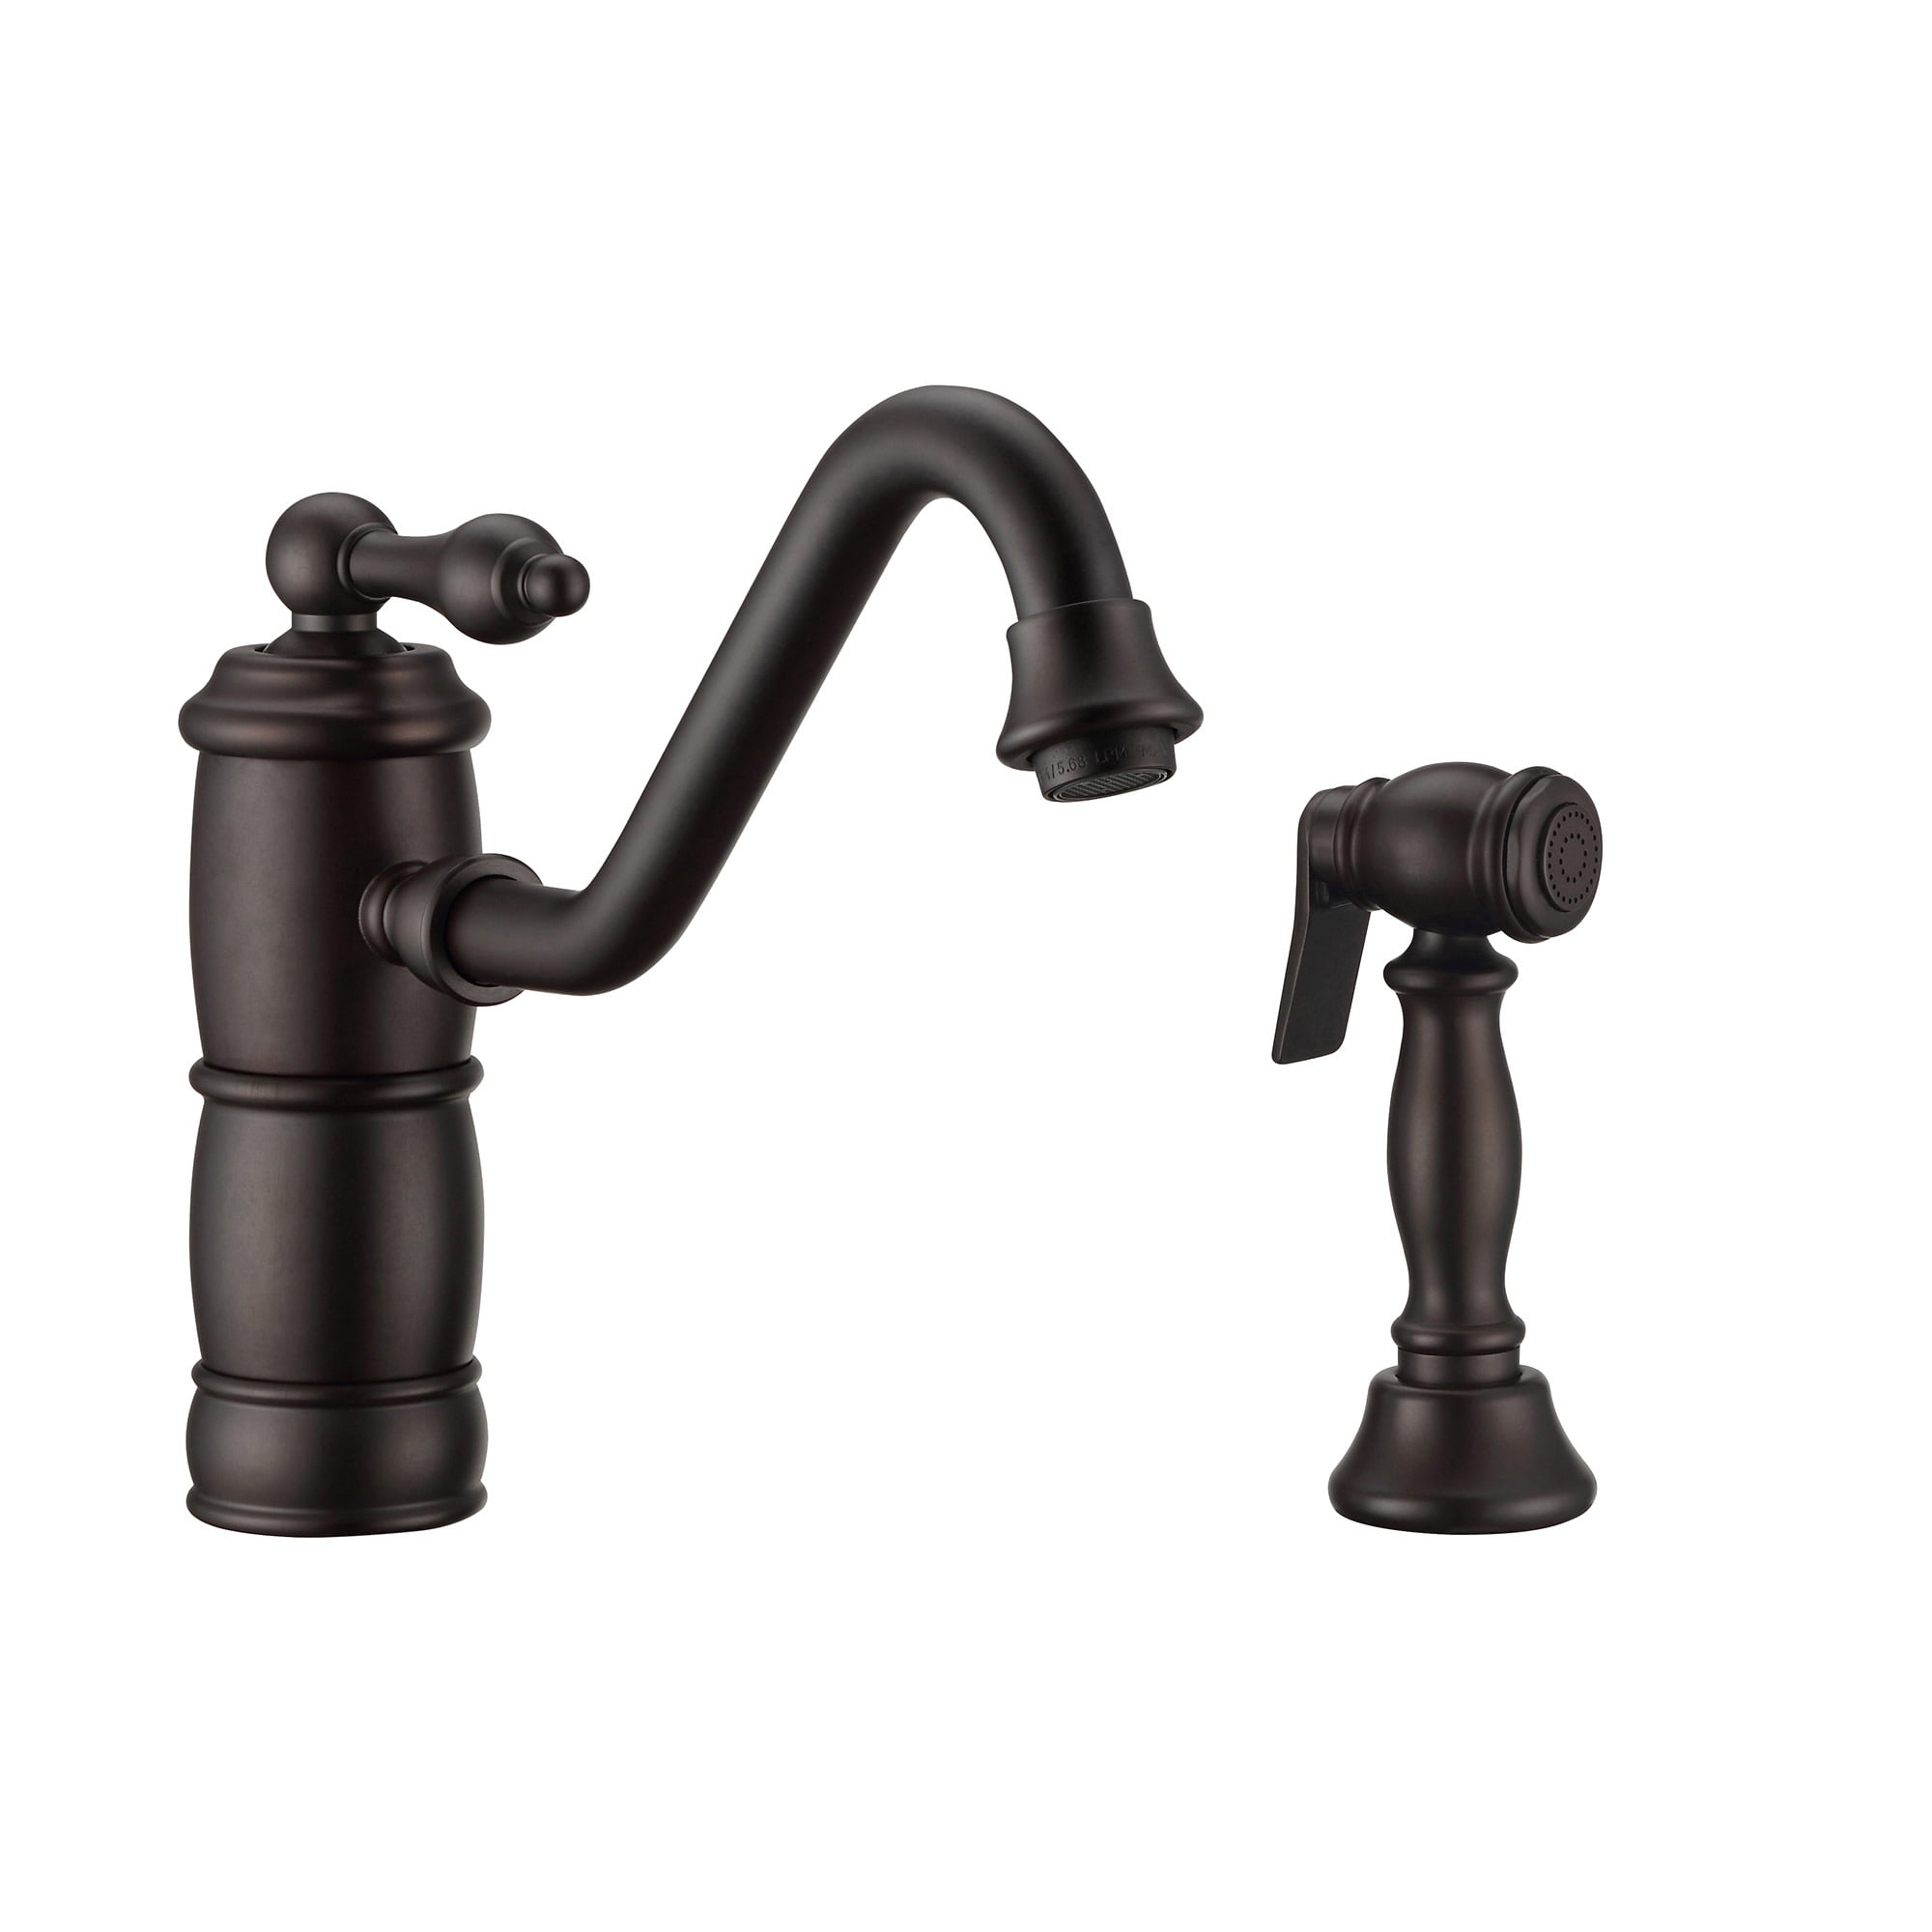 Whktsl3-2200-nt-orb Vintage Iii Plus Single-lever Faucet With A Traditional Swivel Spout - Oil Rubbed Bronze